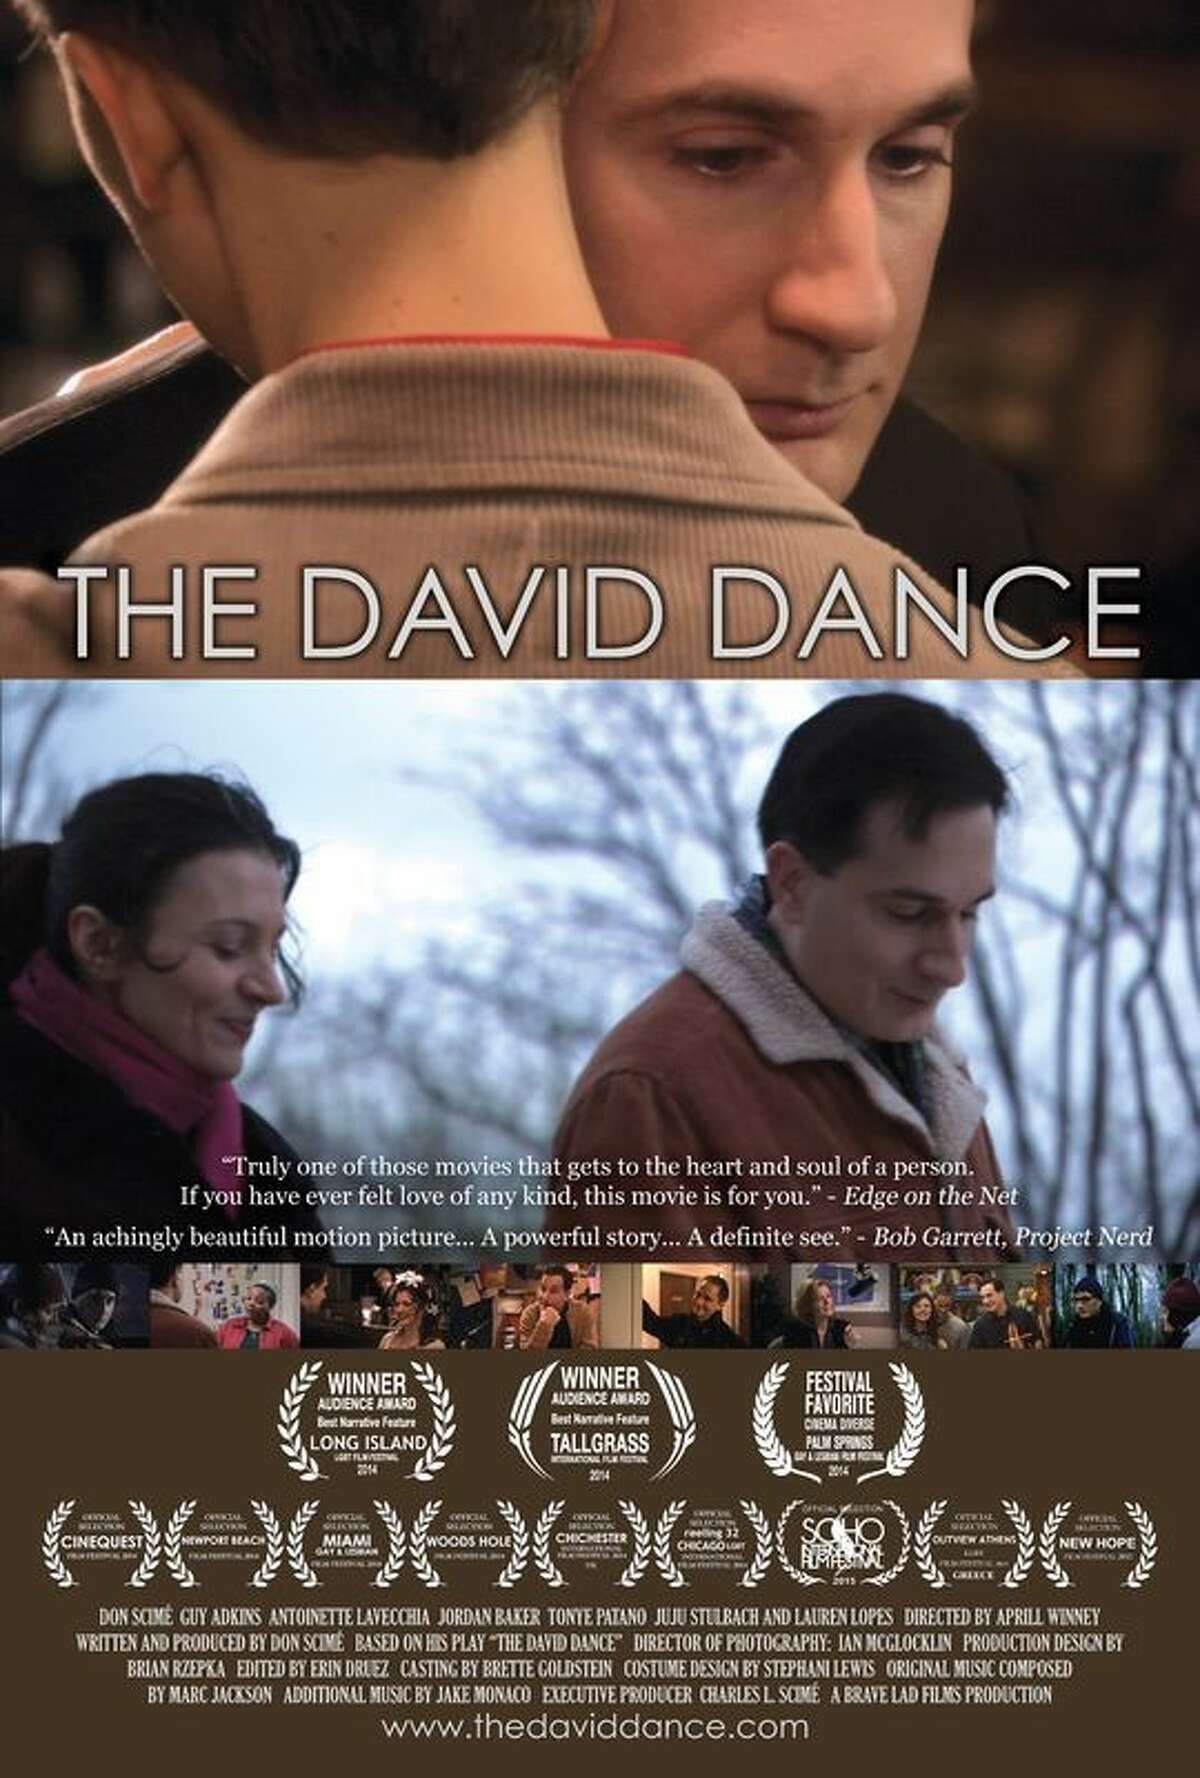 “The David Dance” is an award-winning film that will be shown Wednesday, Aug. 5, at Bethel Cinema.